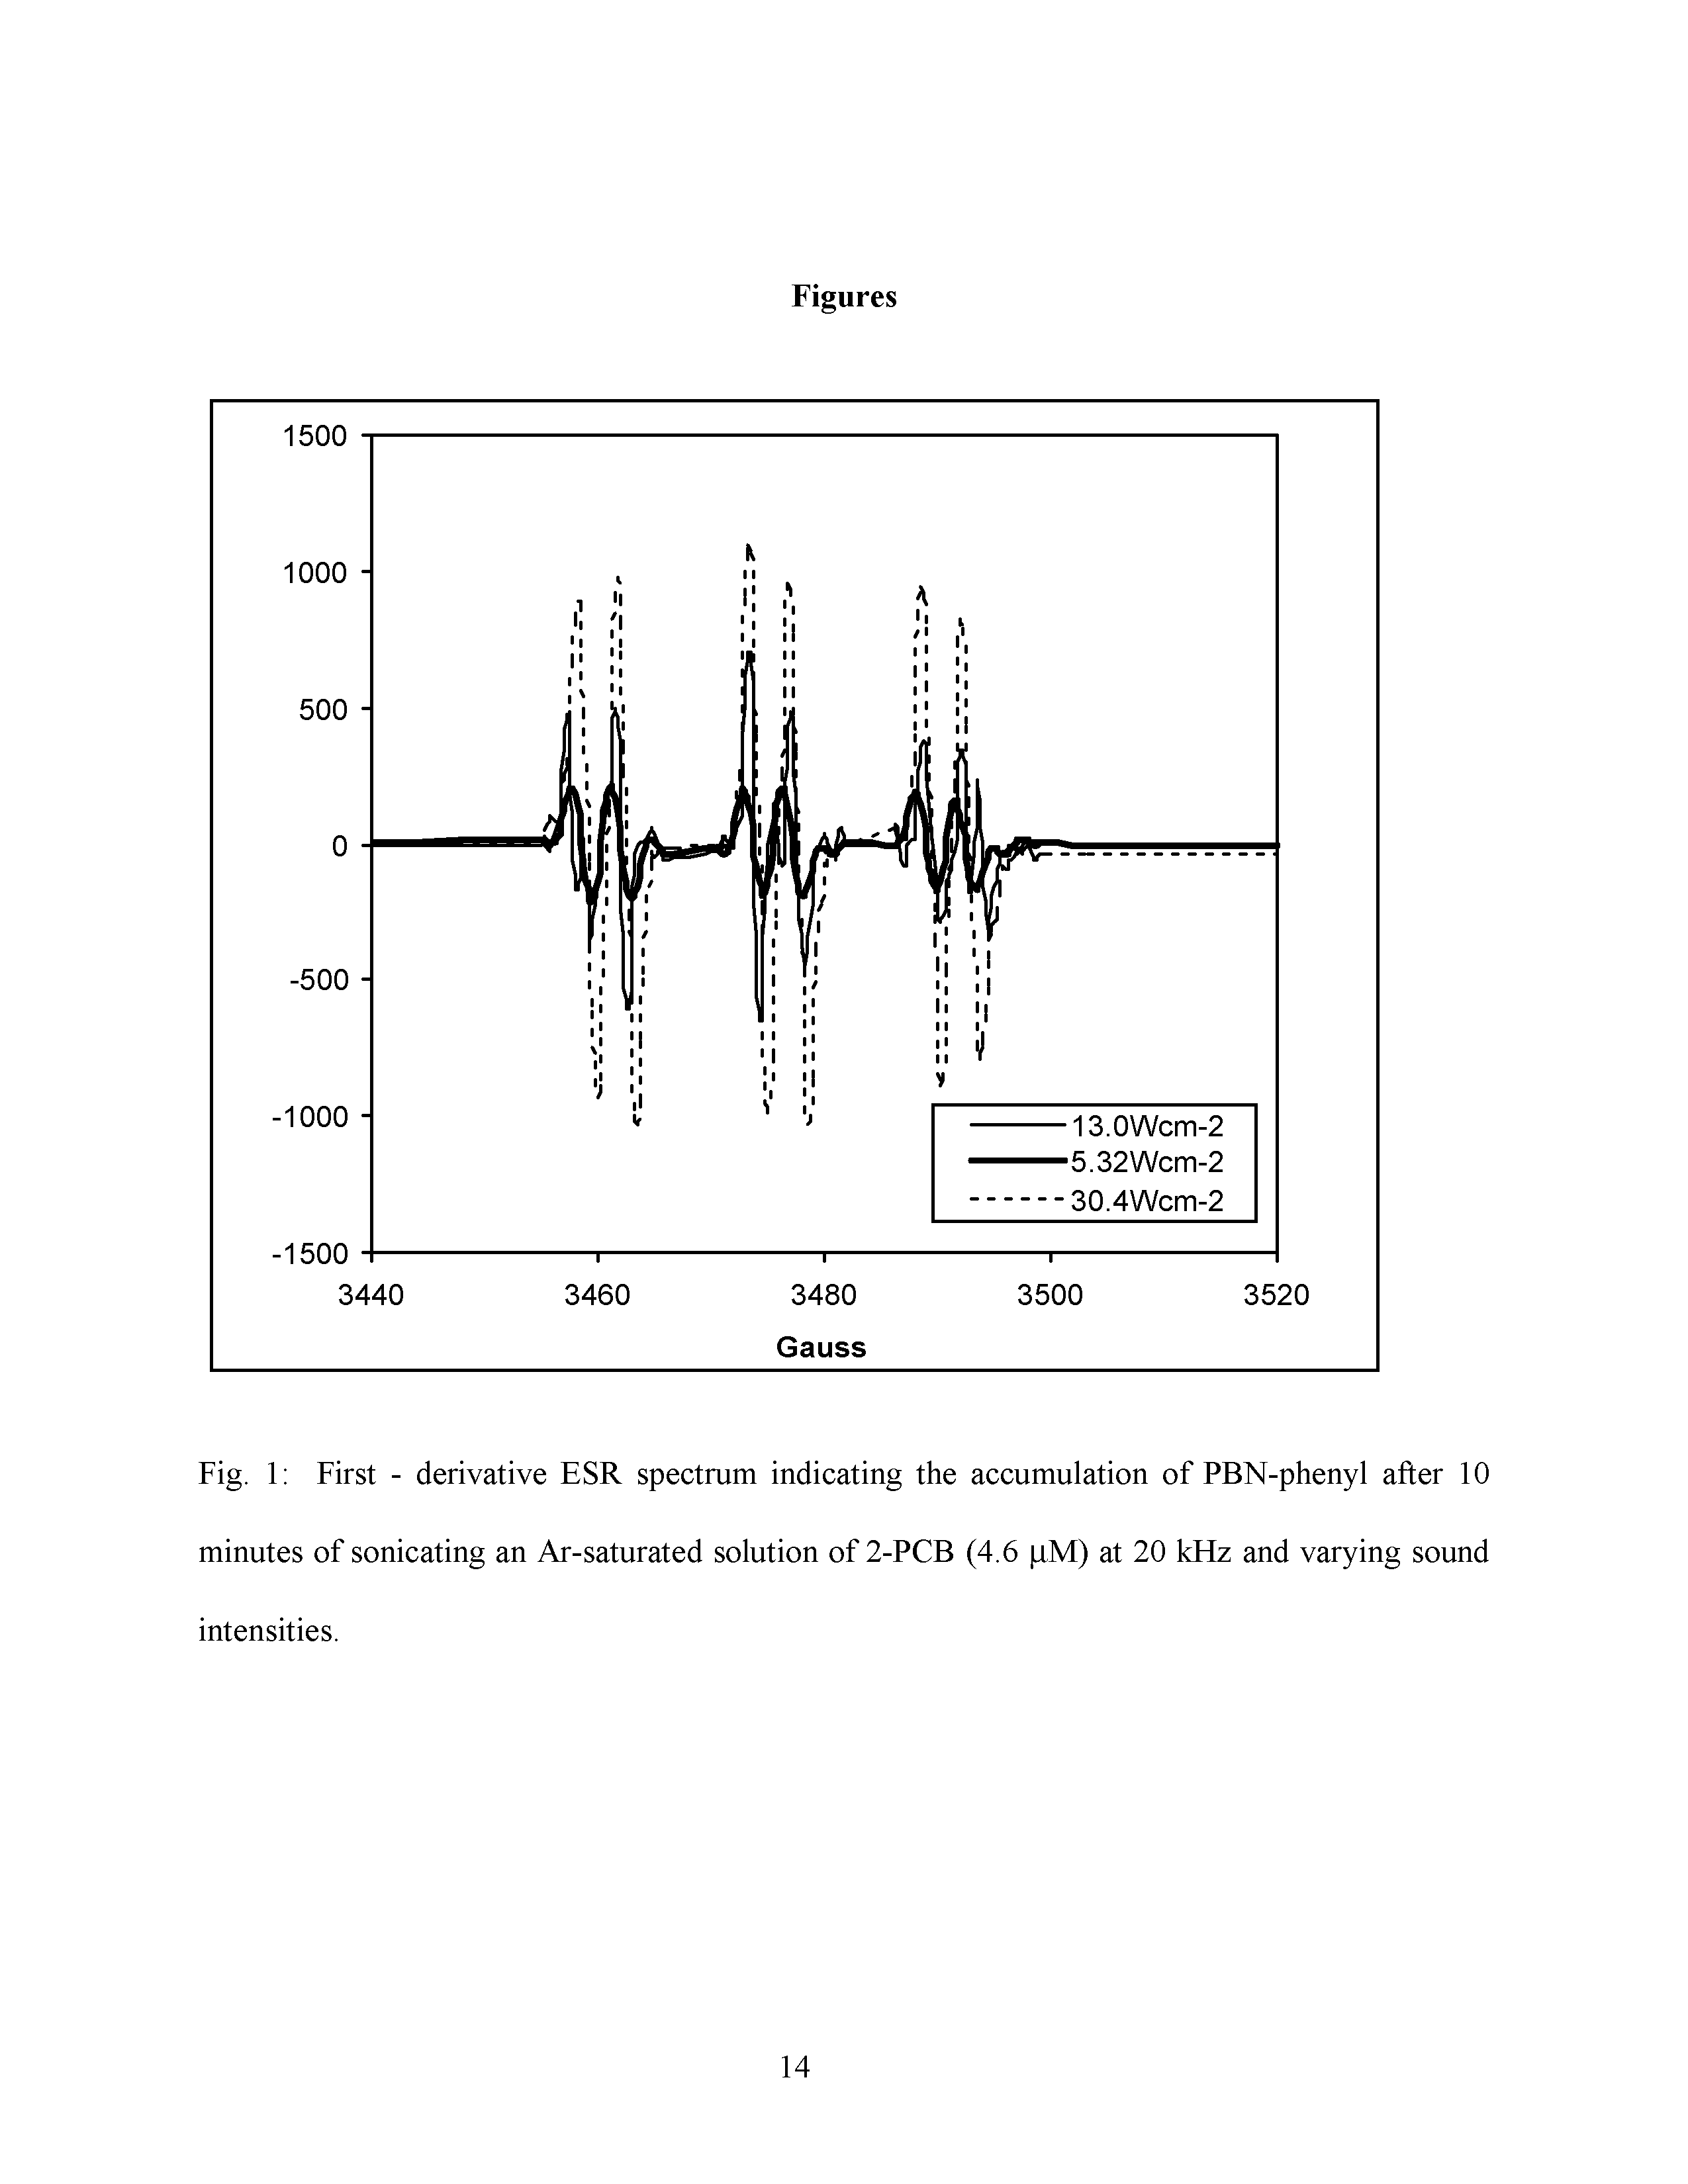 Fig. 1 First - derivative ESR spectrum indicating the accumulation of PBN-phenyl after 10 minutes of sonicating an Ar-saturated solution of 2-PCB (4.6 iM) at 20 kHz and varying sound intensities.